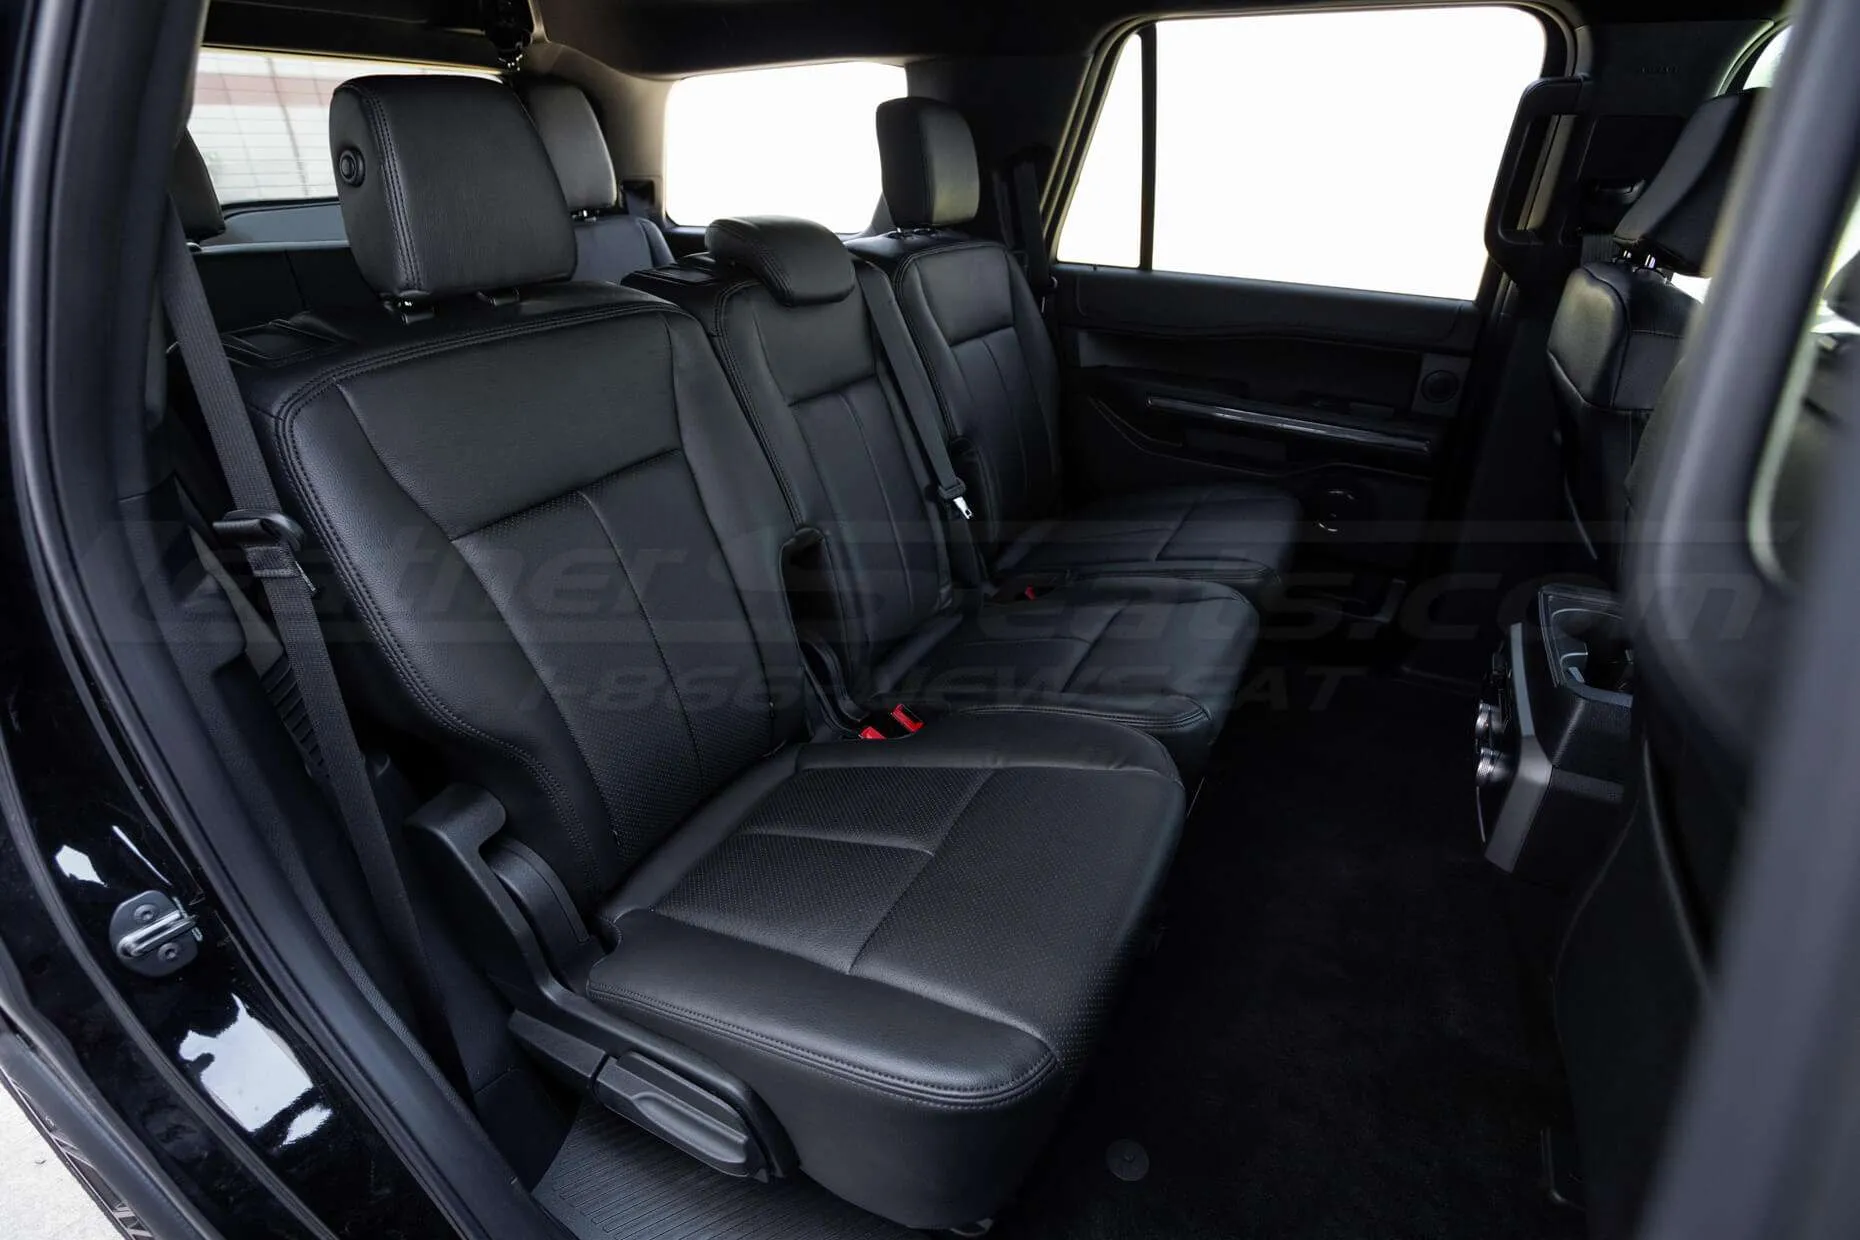 Ford Expedition Leather Upholstery Kit - Black - Installed - Middle row passenger side